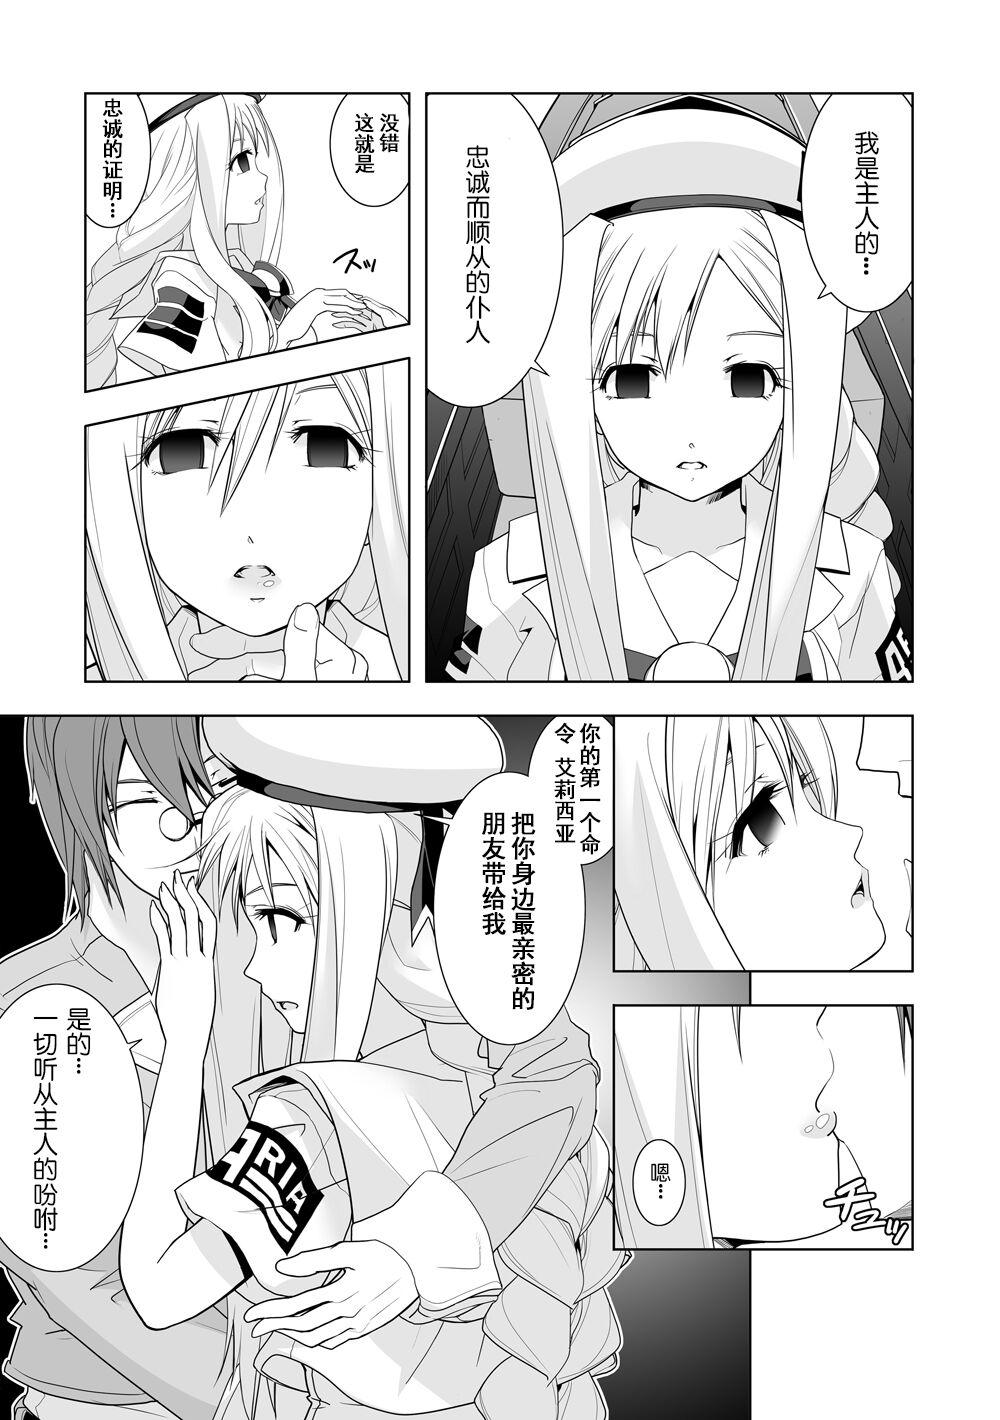 Pussyeating AR*A Mind-control Manga - Aria Mofos - Page 3